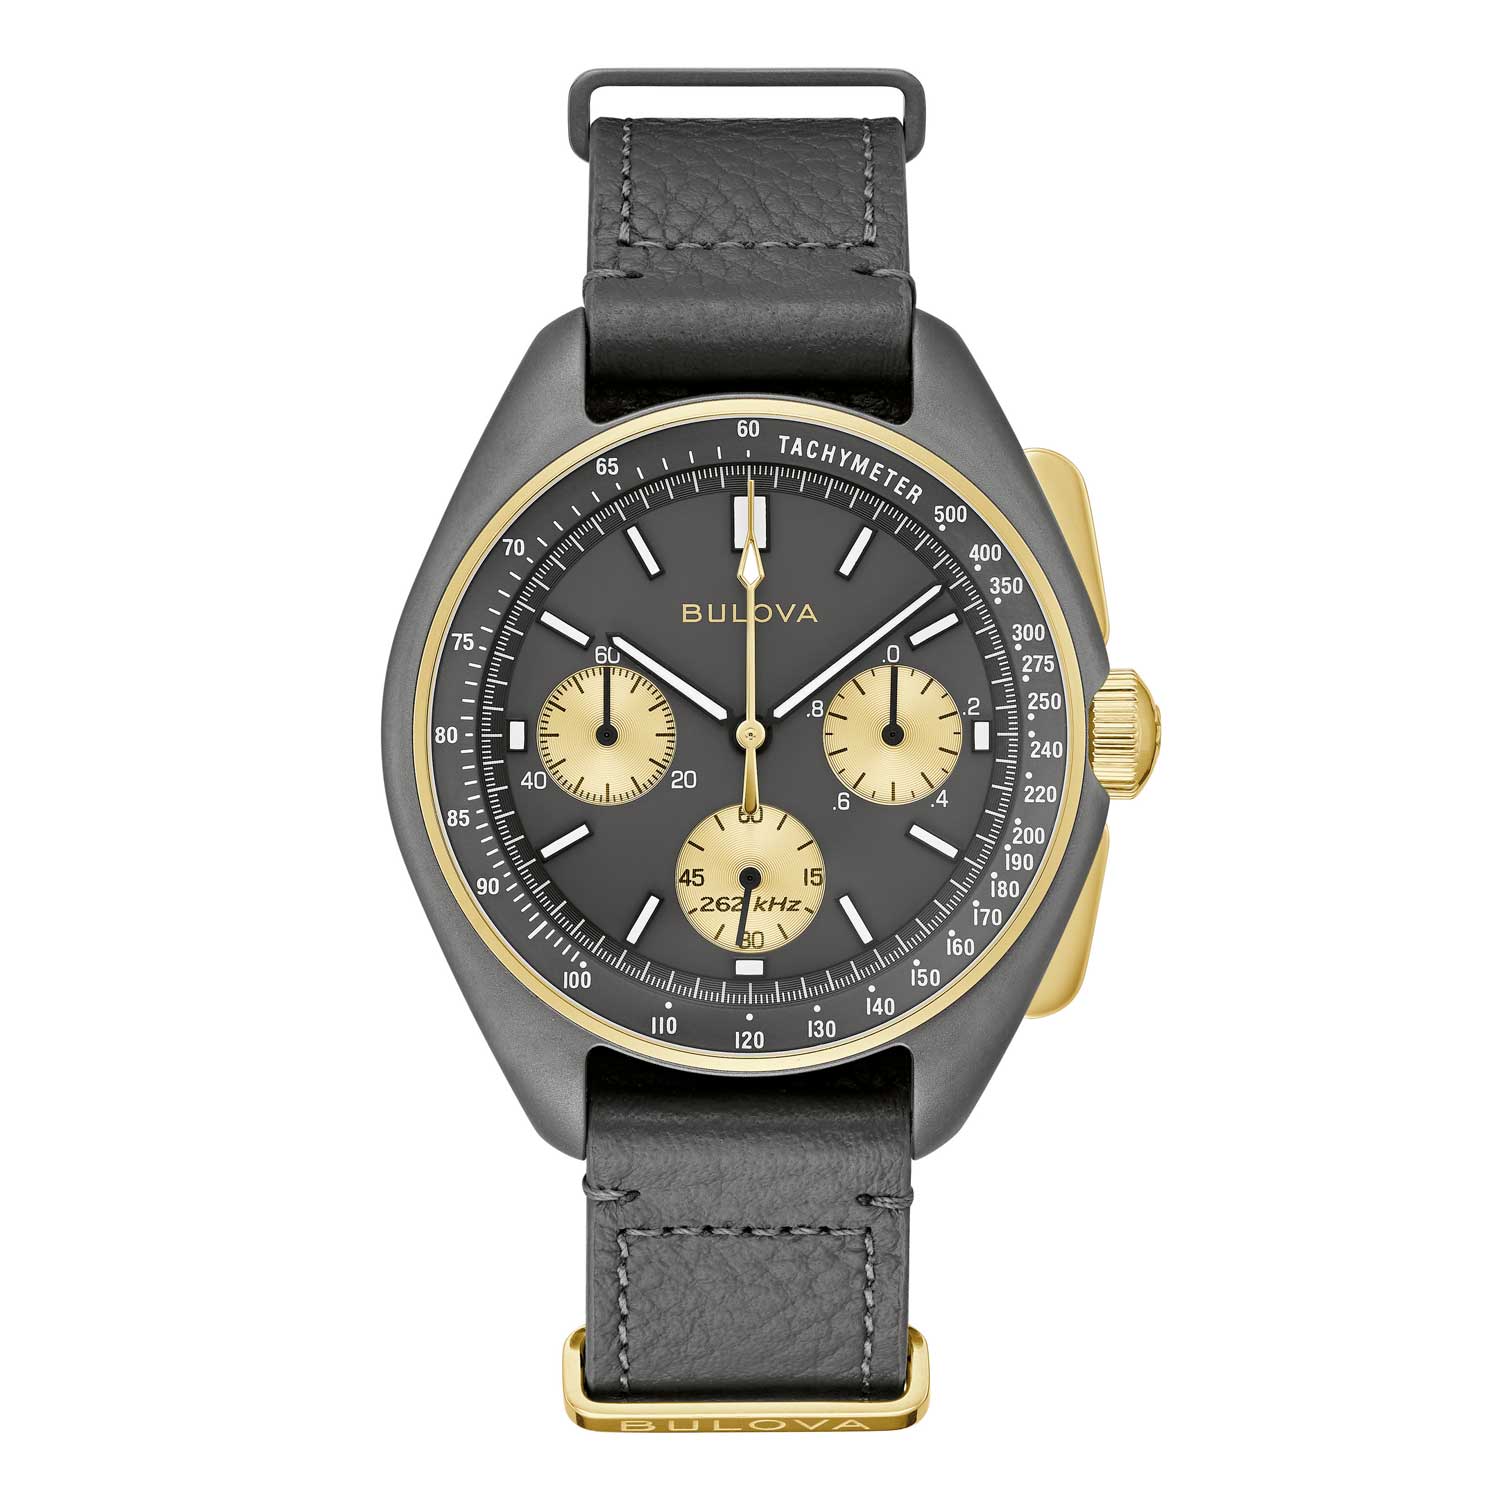 Bulova is commemorating the memorable Apollo 15 mission from 1971 with the introduction of the 50th Anniversary Lunar Pilot Limited Edition timepiece.